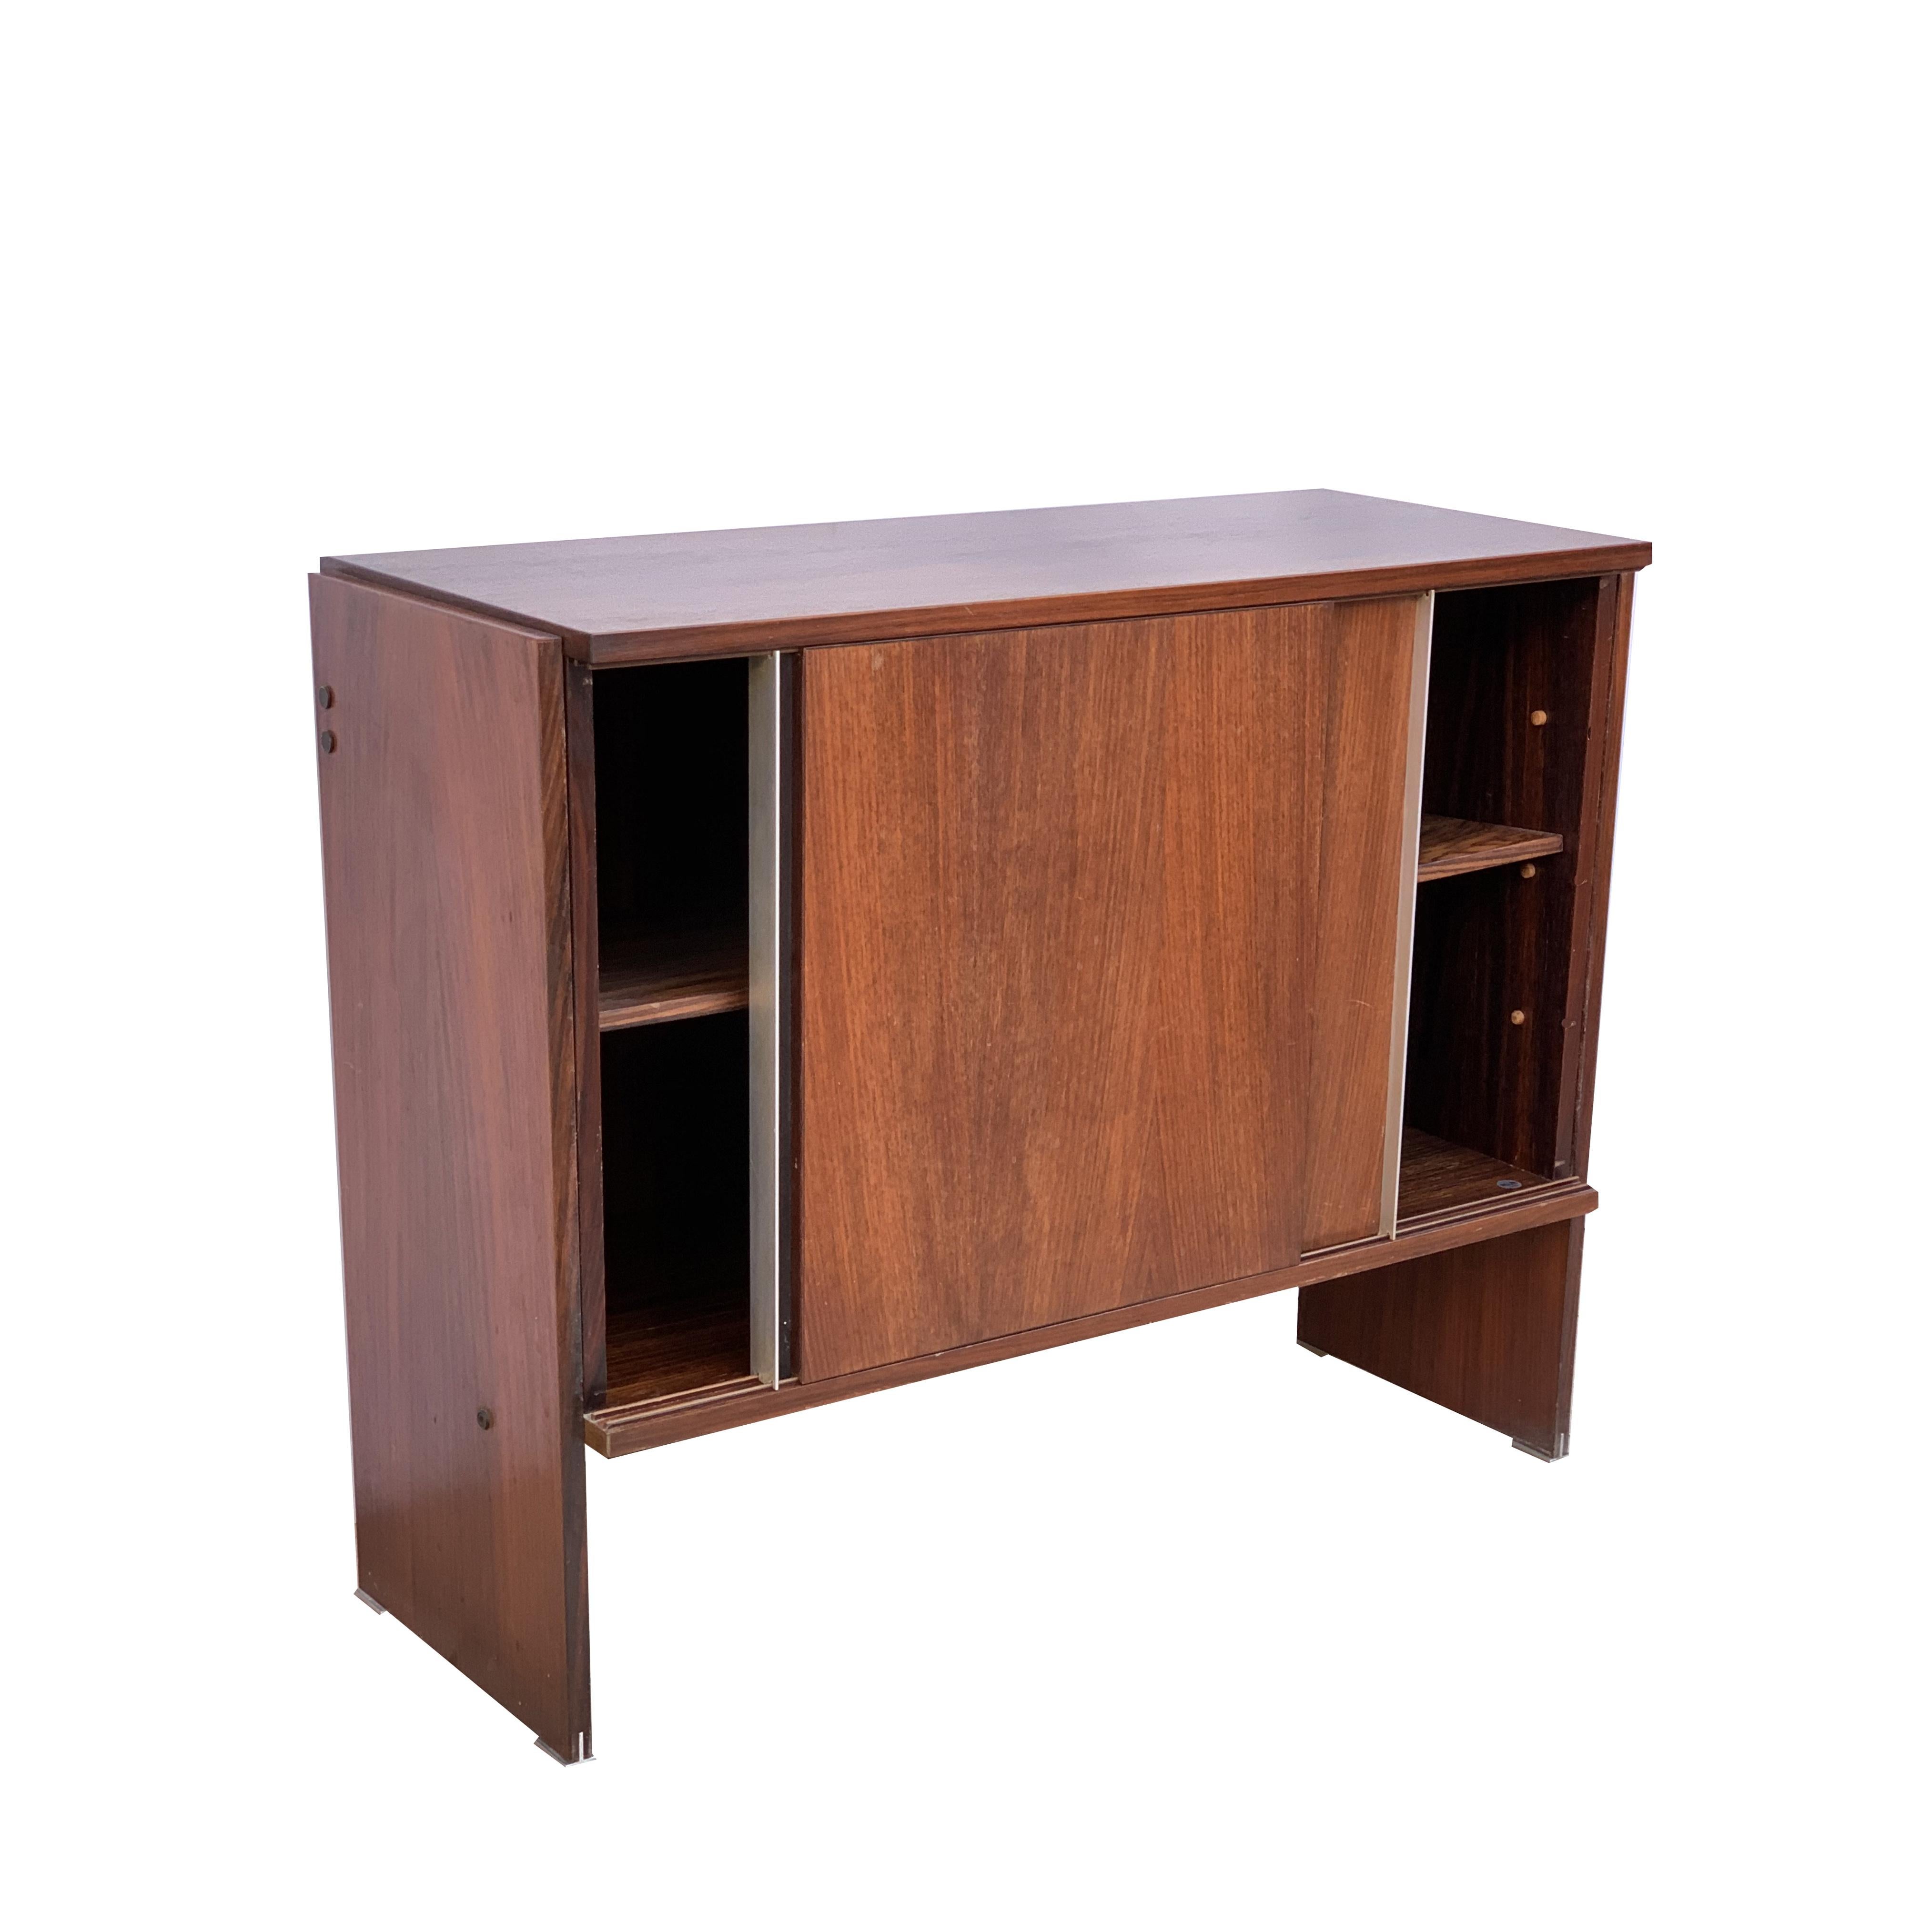 Rosewood sideboard with sliding doors, MIM Roma. Riginiture in aluminum.
It rests on four aluminum bases.
Label inside.